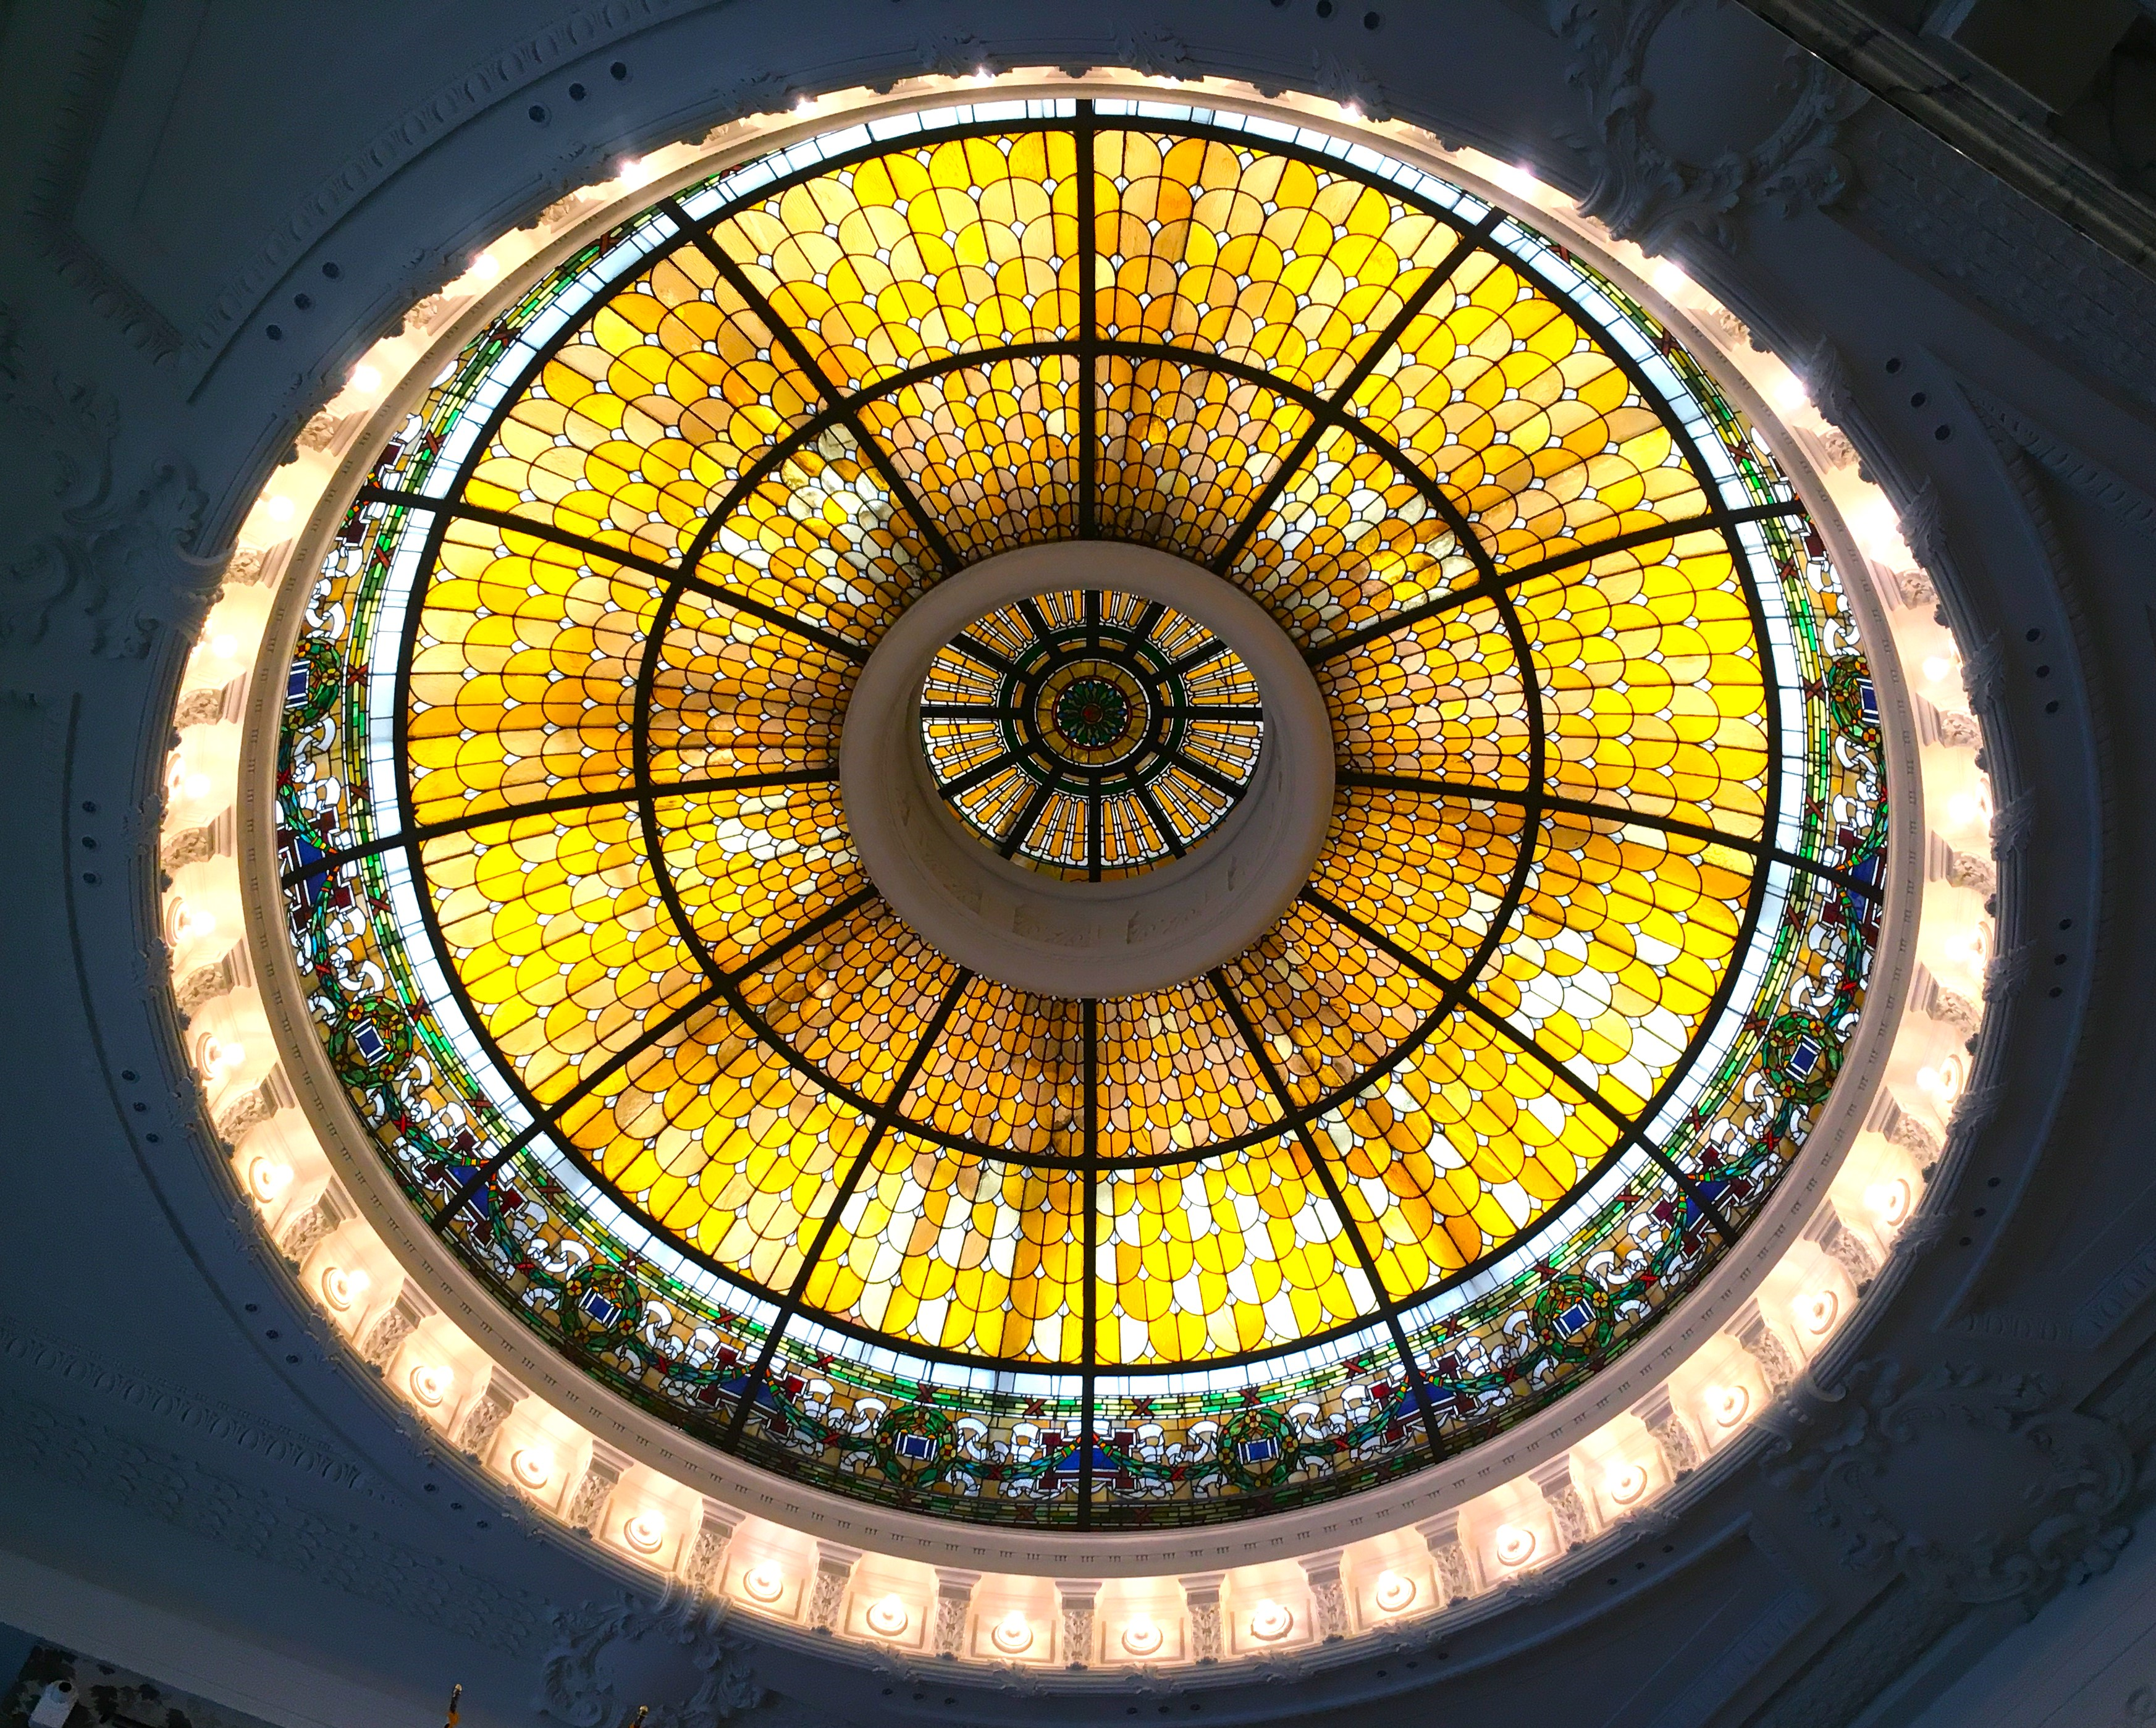 A deep look into Baltimore's stained glass history